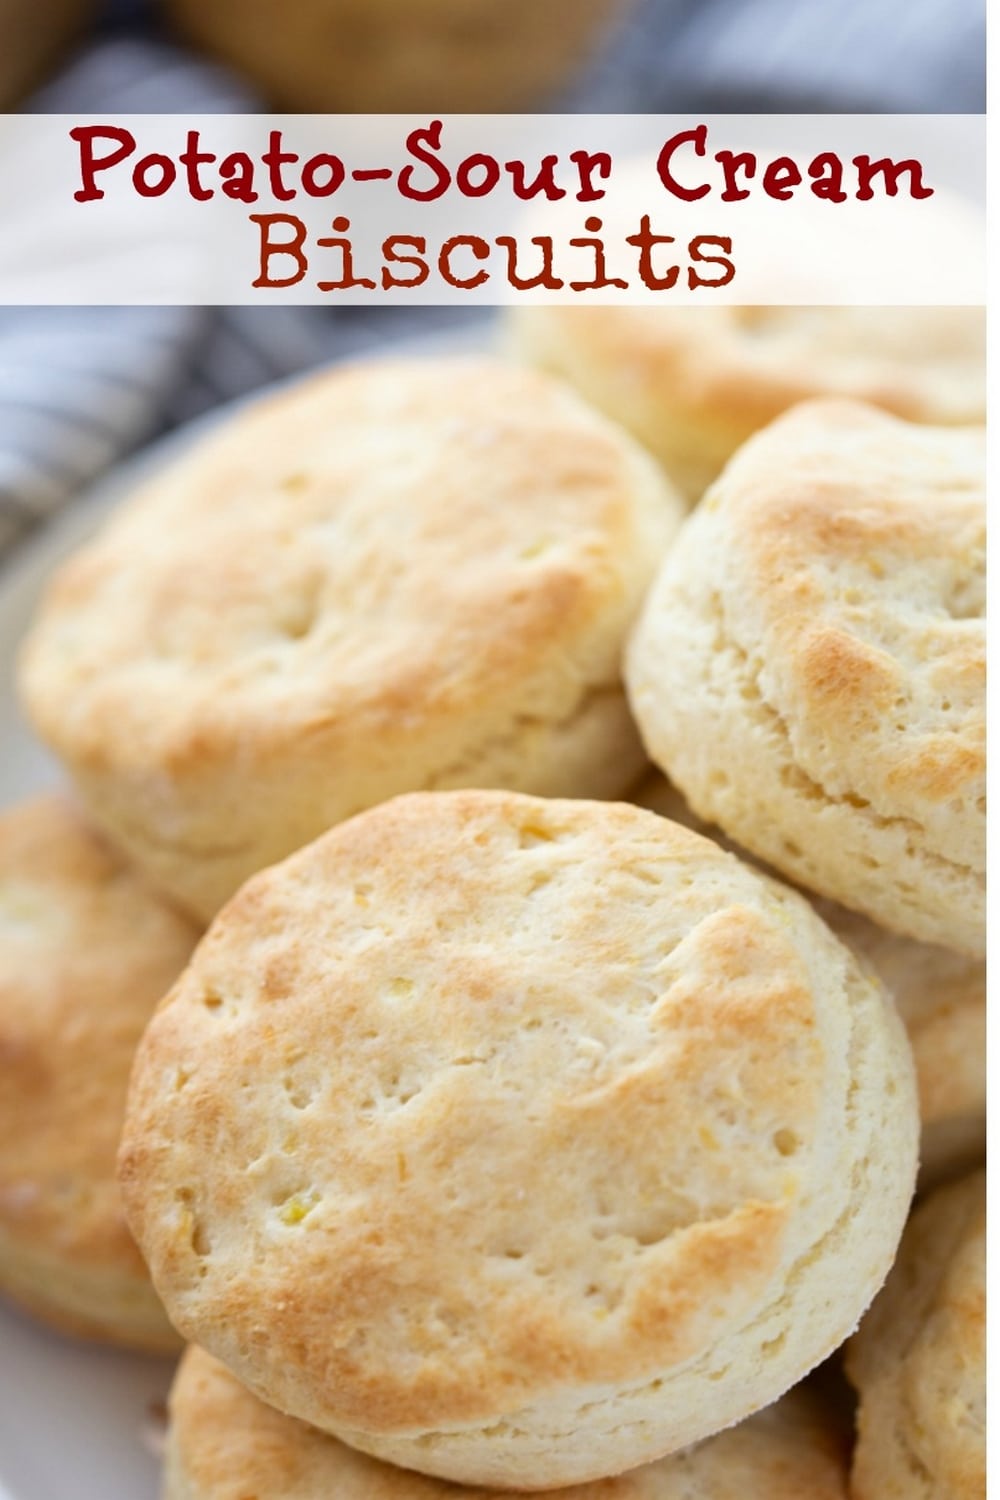 Enjoy the comfort of fluffy sour cream biscuits with potato mixed in – a twist on my go-to made-from-scratch biscuits. These buttery biscuits are perfect for those who love a flavorful option without the need for yeast or rolling out dough. The richness of sour cream and the heartiness of potatoes in my homemade biscuit creation is one of my absolute favorite recipes. via @cmpollak1